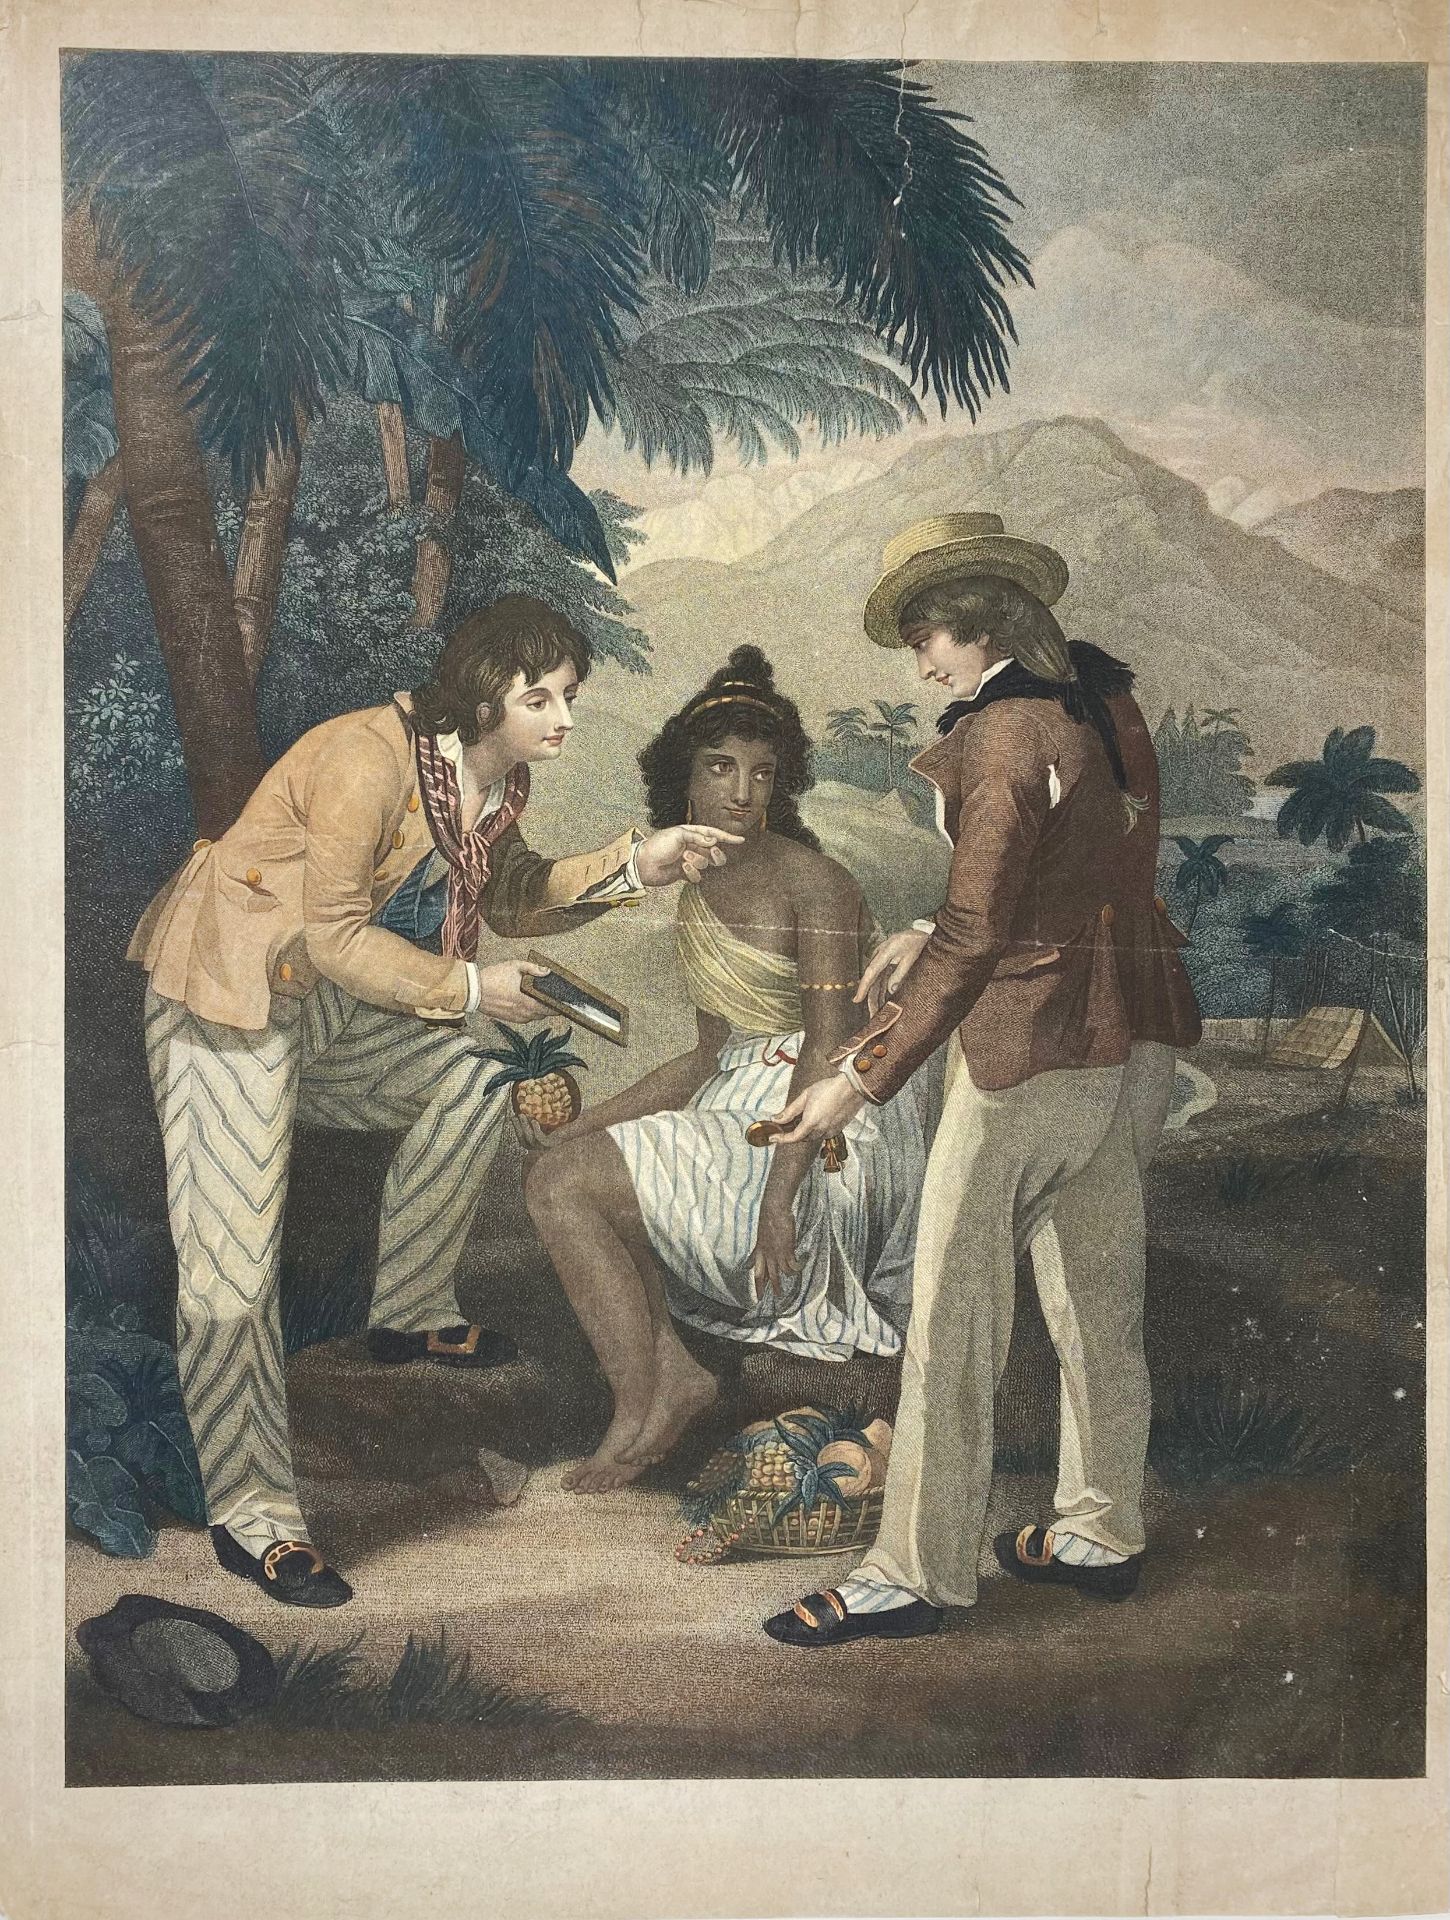 INDIA -- "SCARCITY IN INDIA". (Lond., c. 1795). Beautiful handcold. aquatint plate by